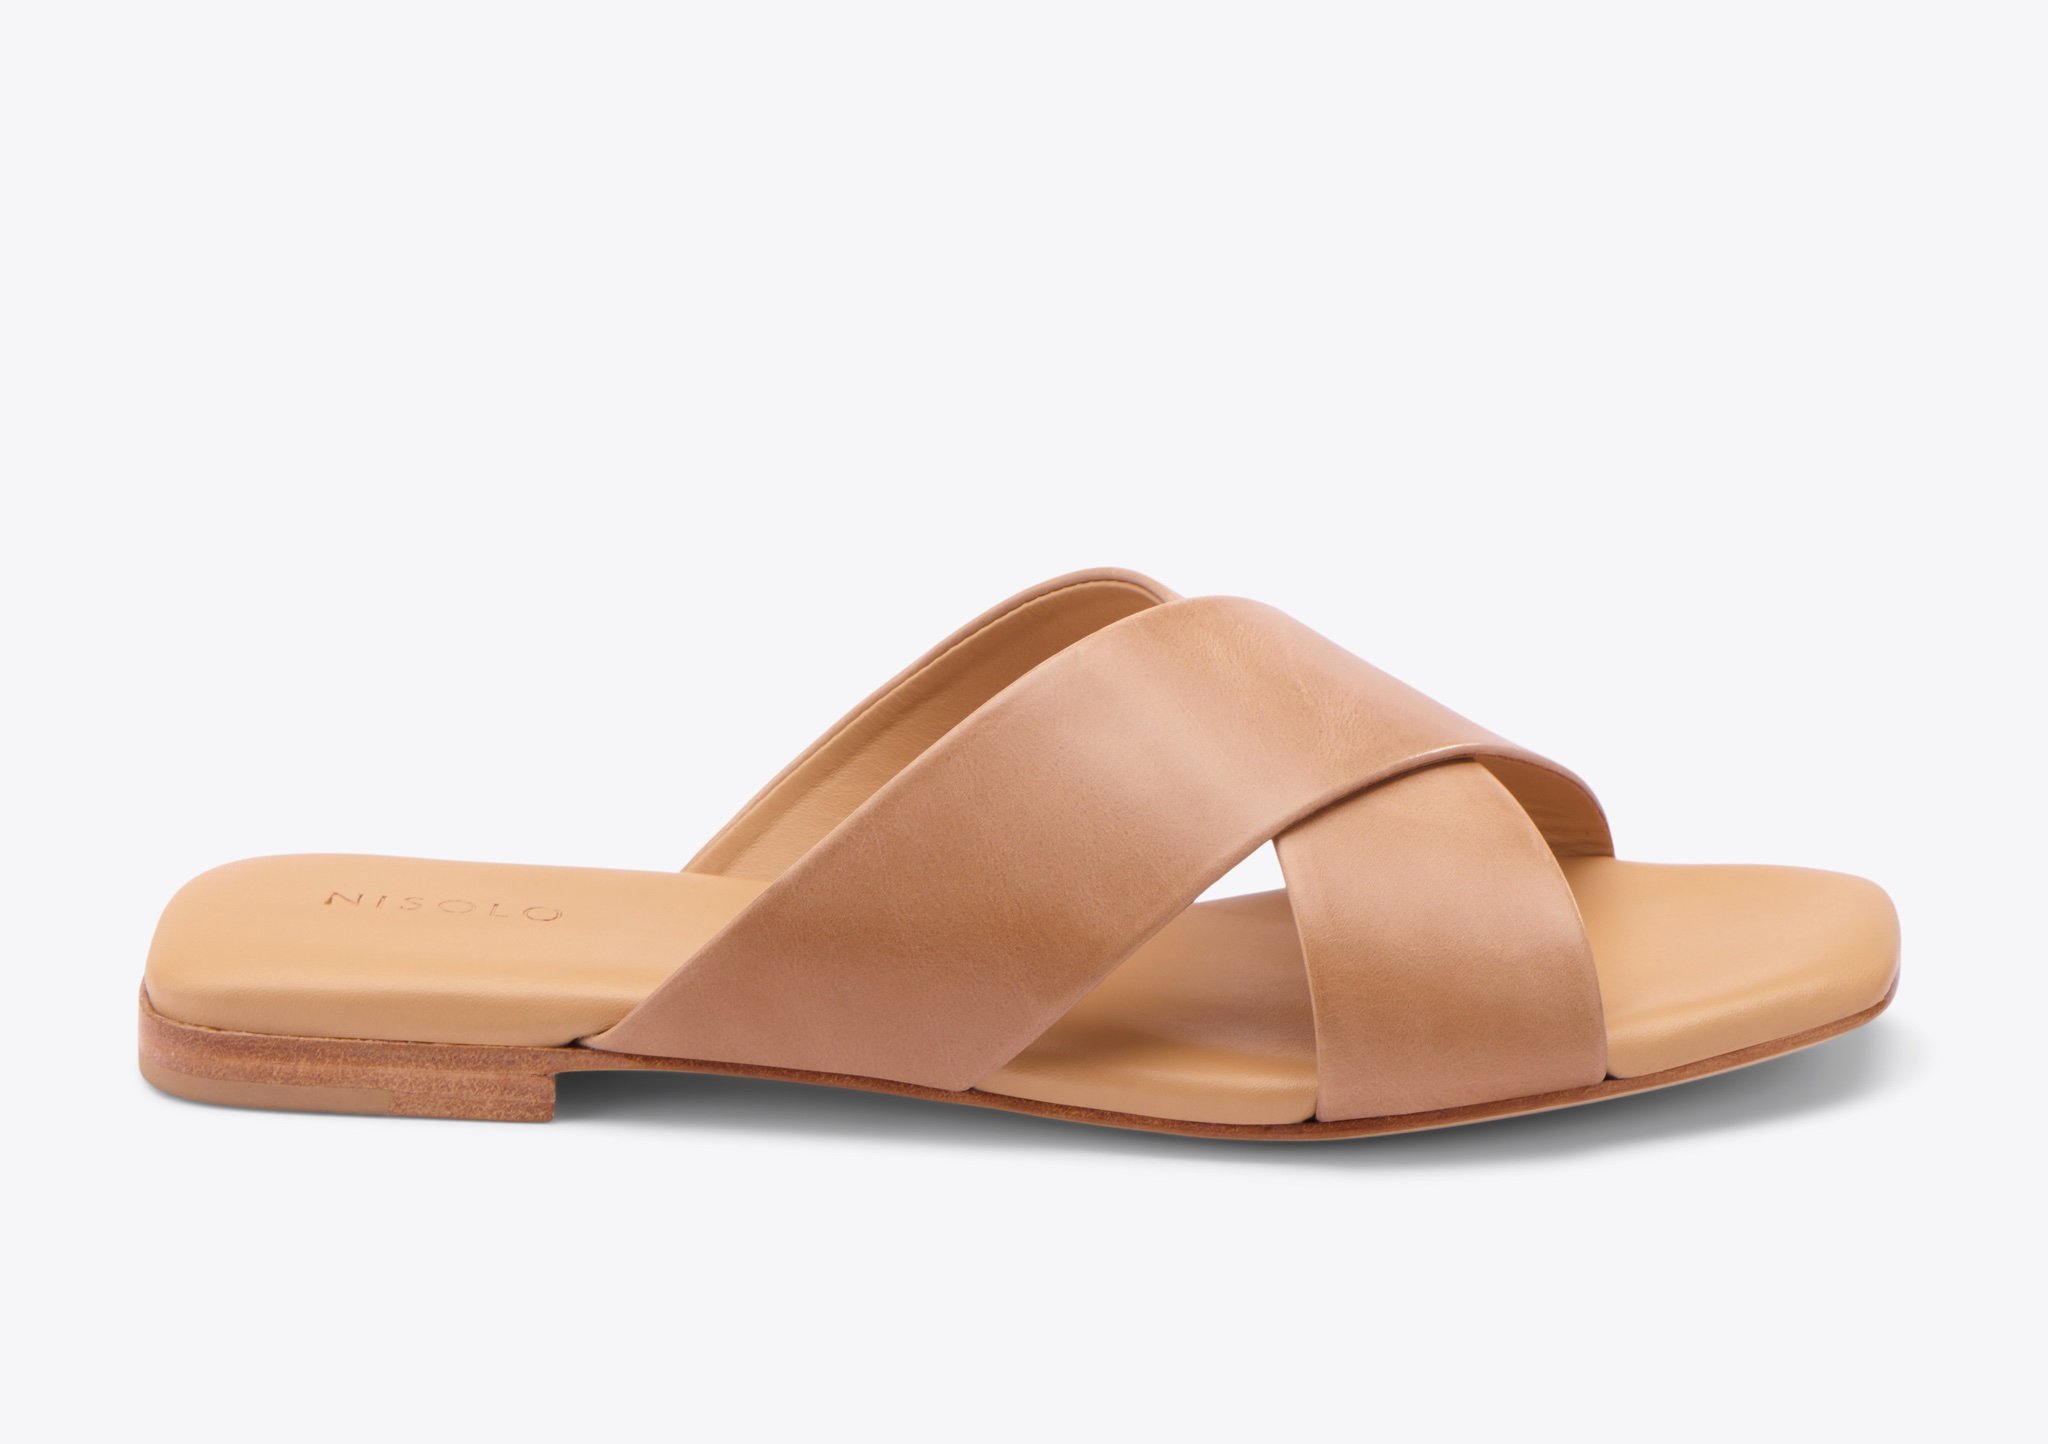 Nisolo Catalina Slide Sandal Almond - Every Nisolo product is built on the foundation of comfort, function, and design. 